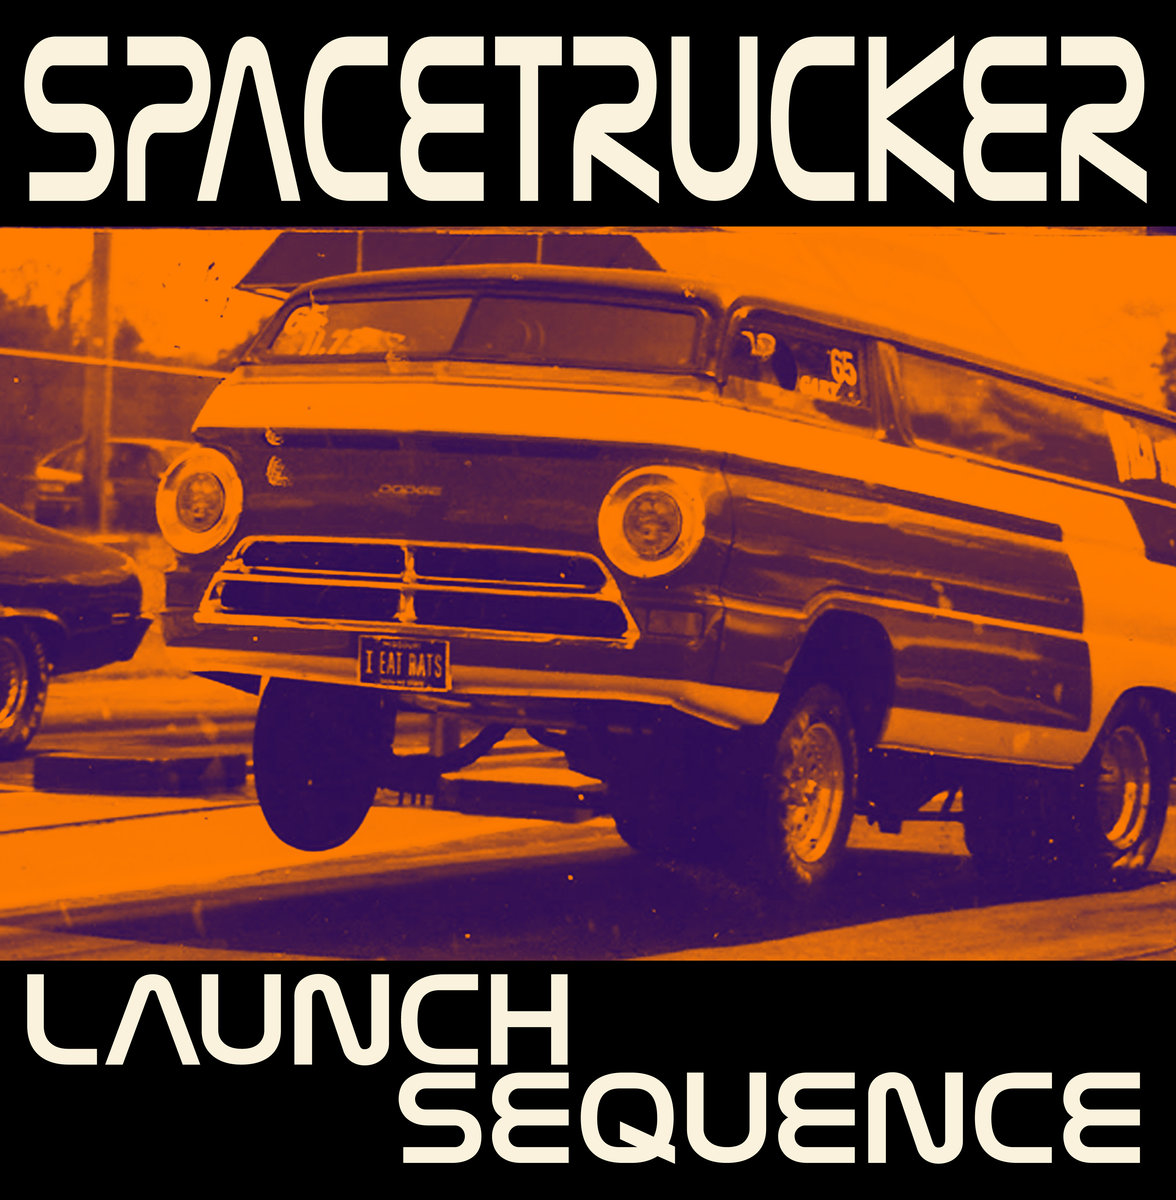 Spacetrucker - Launch Sequence